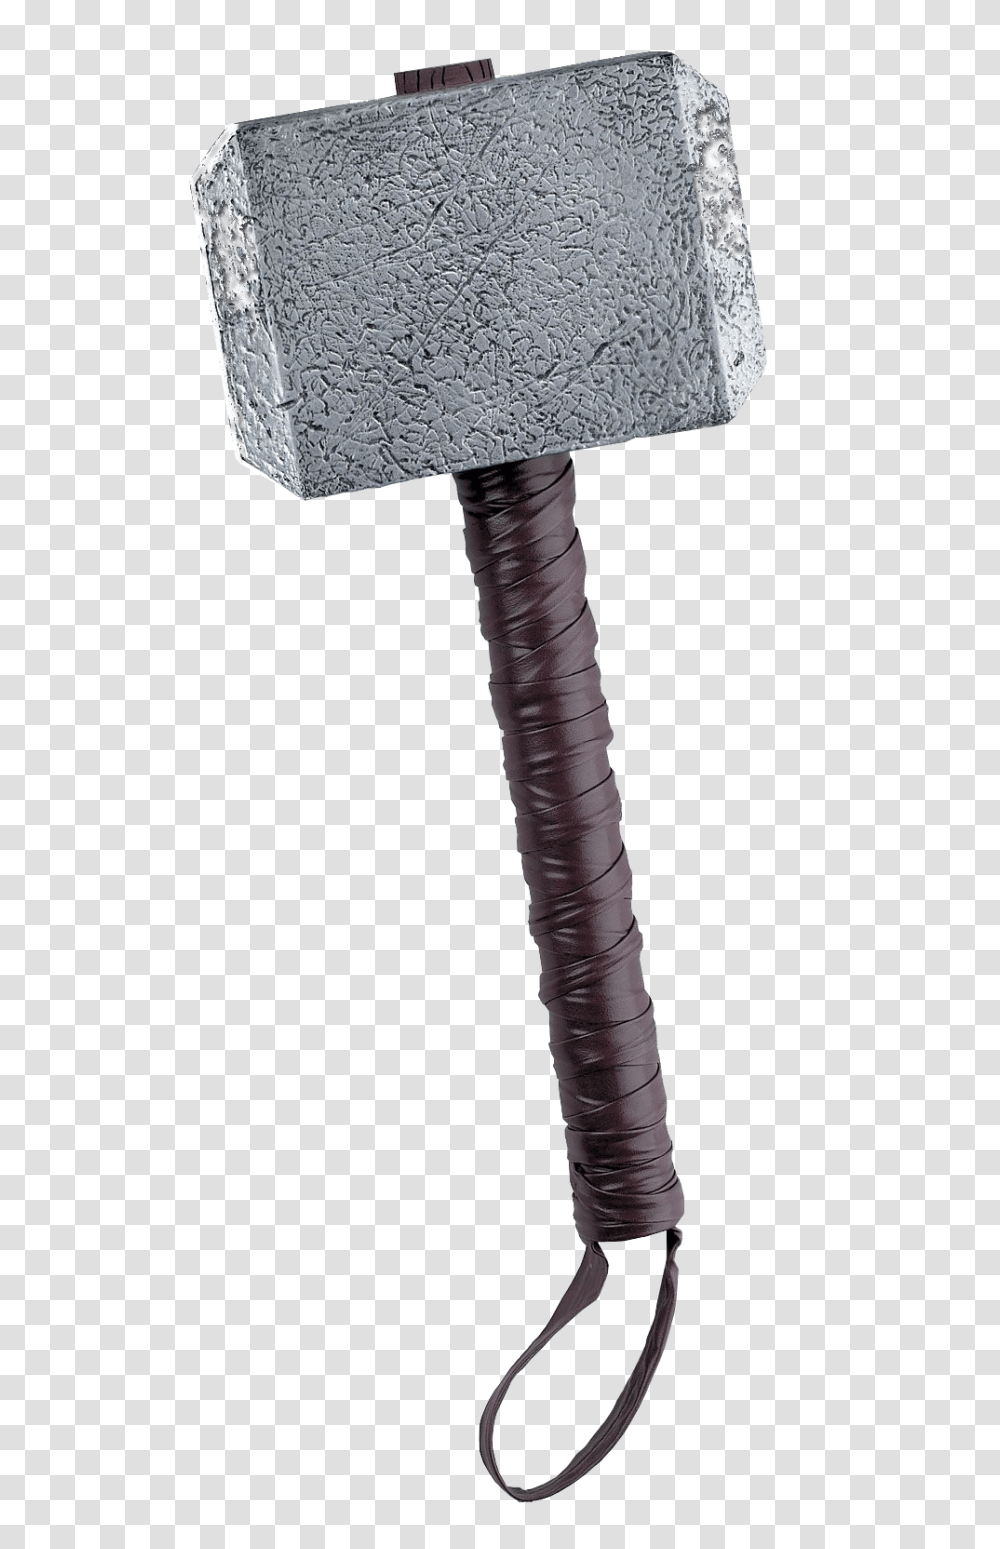 Muscle Mass To God Like Proportions Hammer Of Thor, Tool, Mallet, Lamp Transparent Png